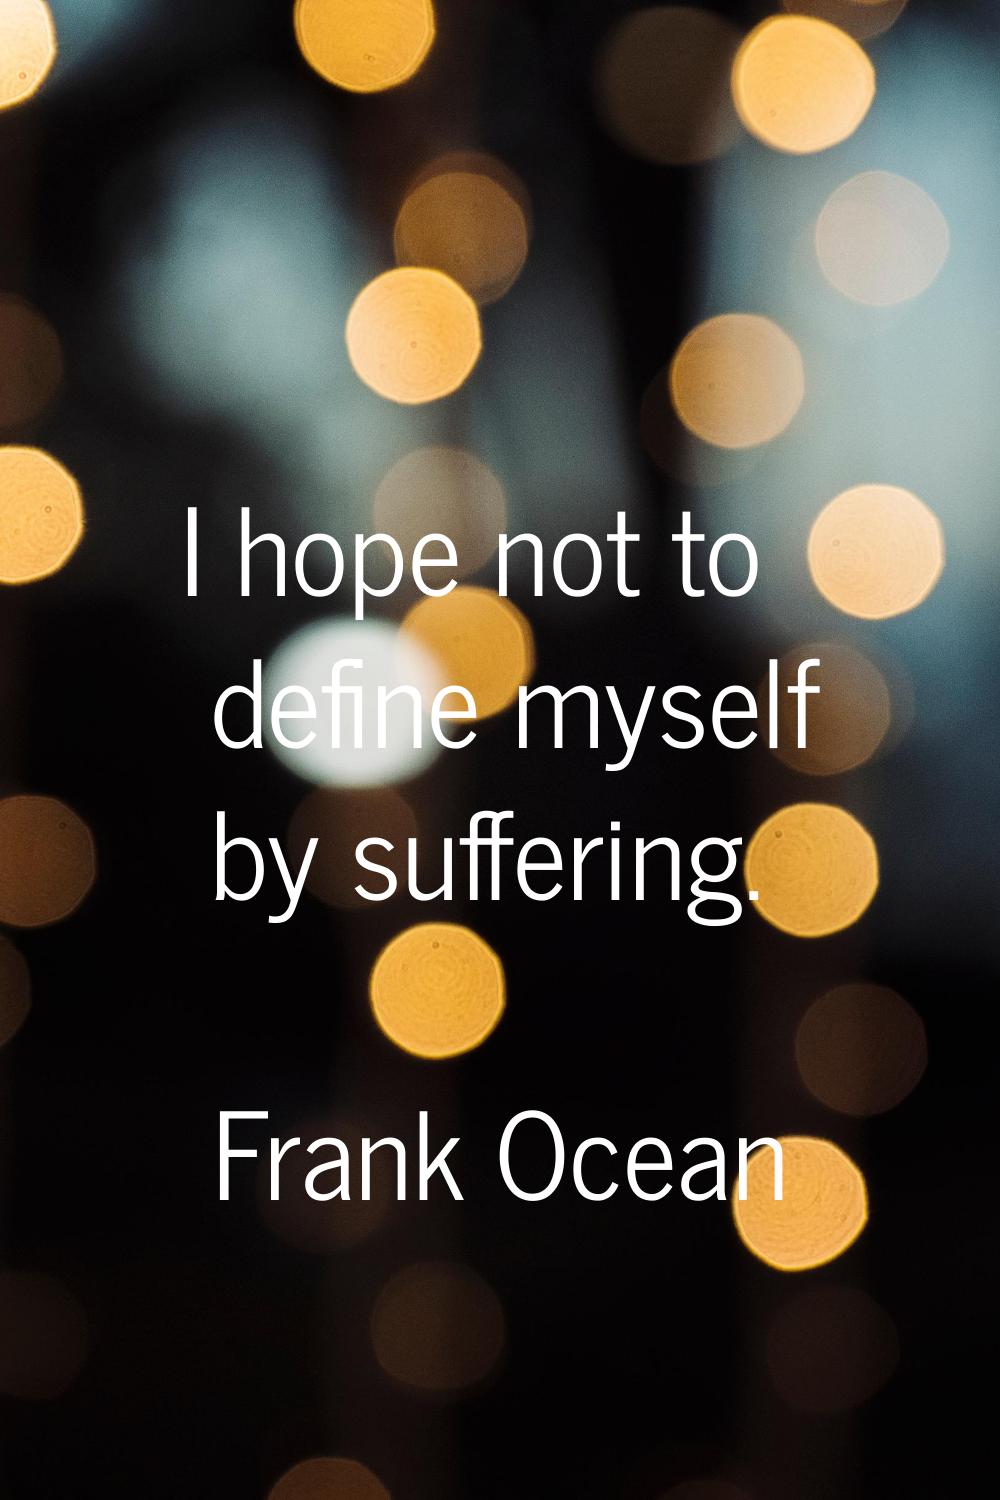 I hope not to define myself by suffering.